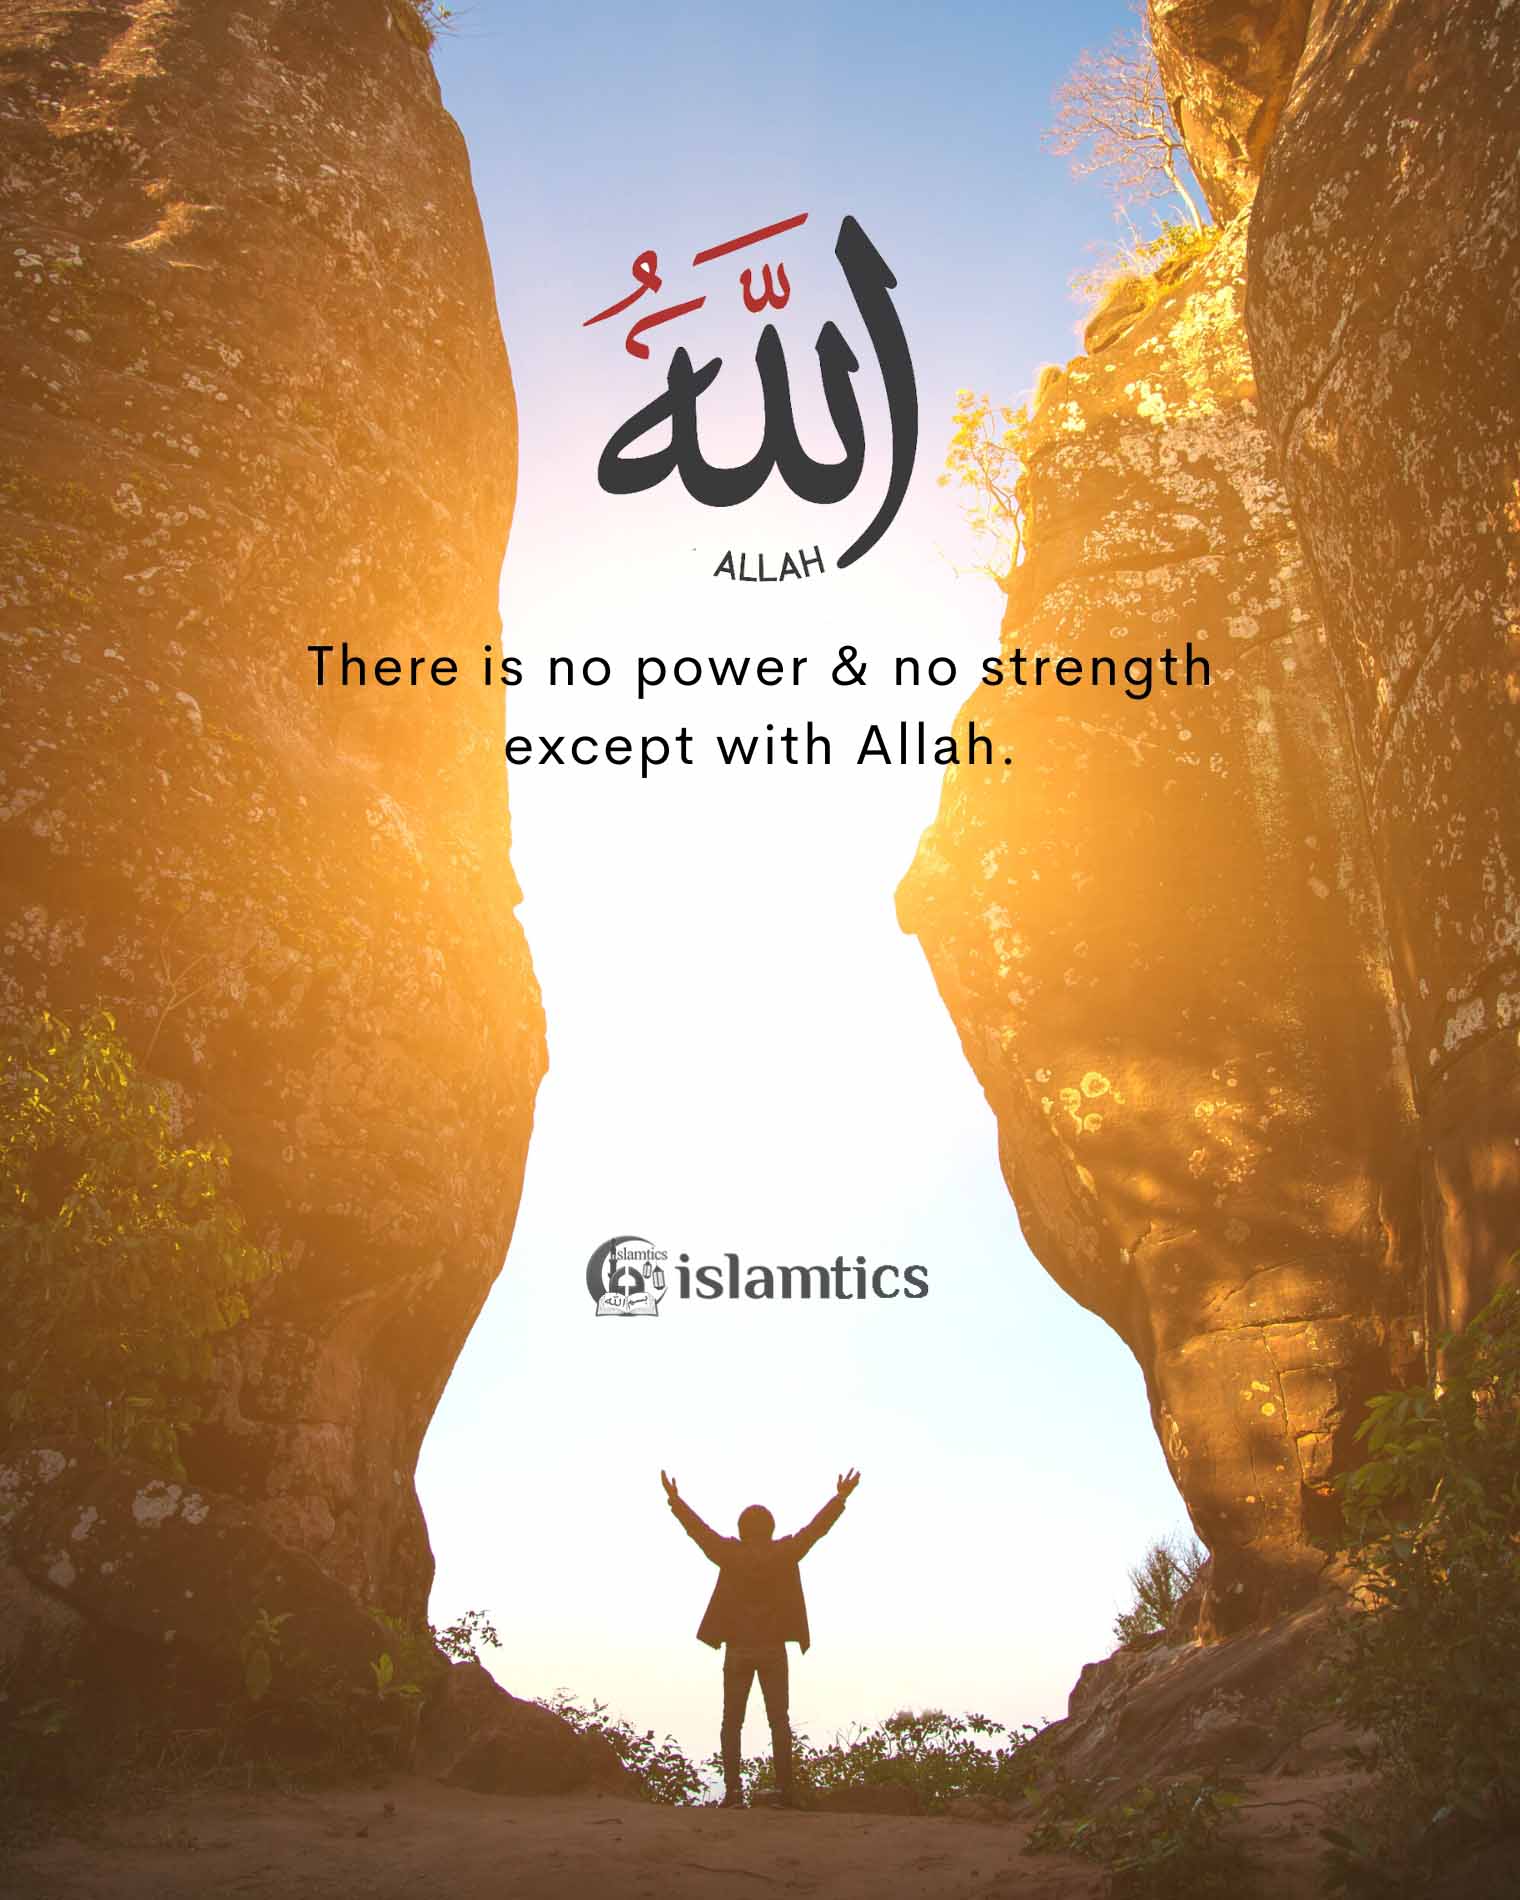  There is no power & no strength except with Allah.